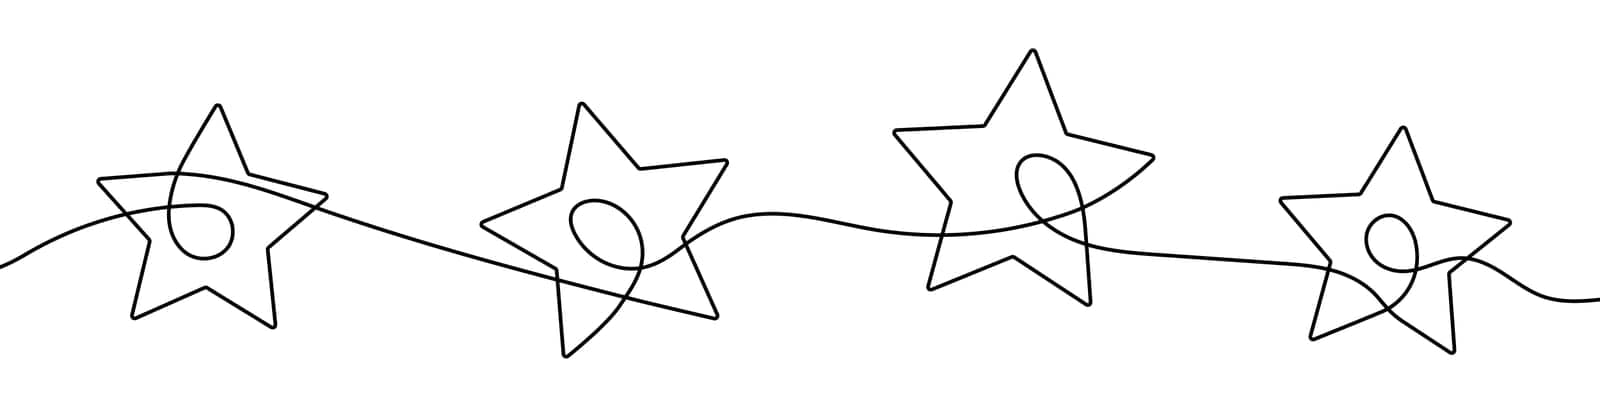 Continuous line drawing of stars. Single line star icons. by Chekman